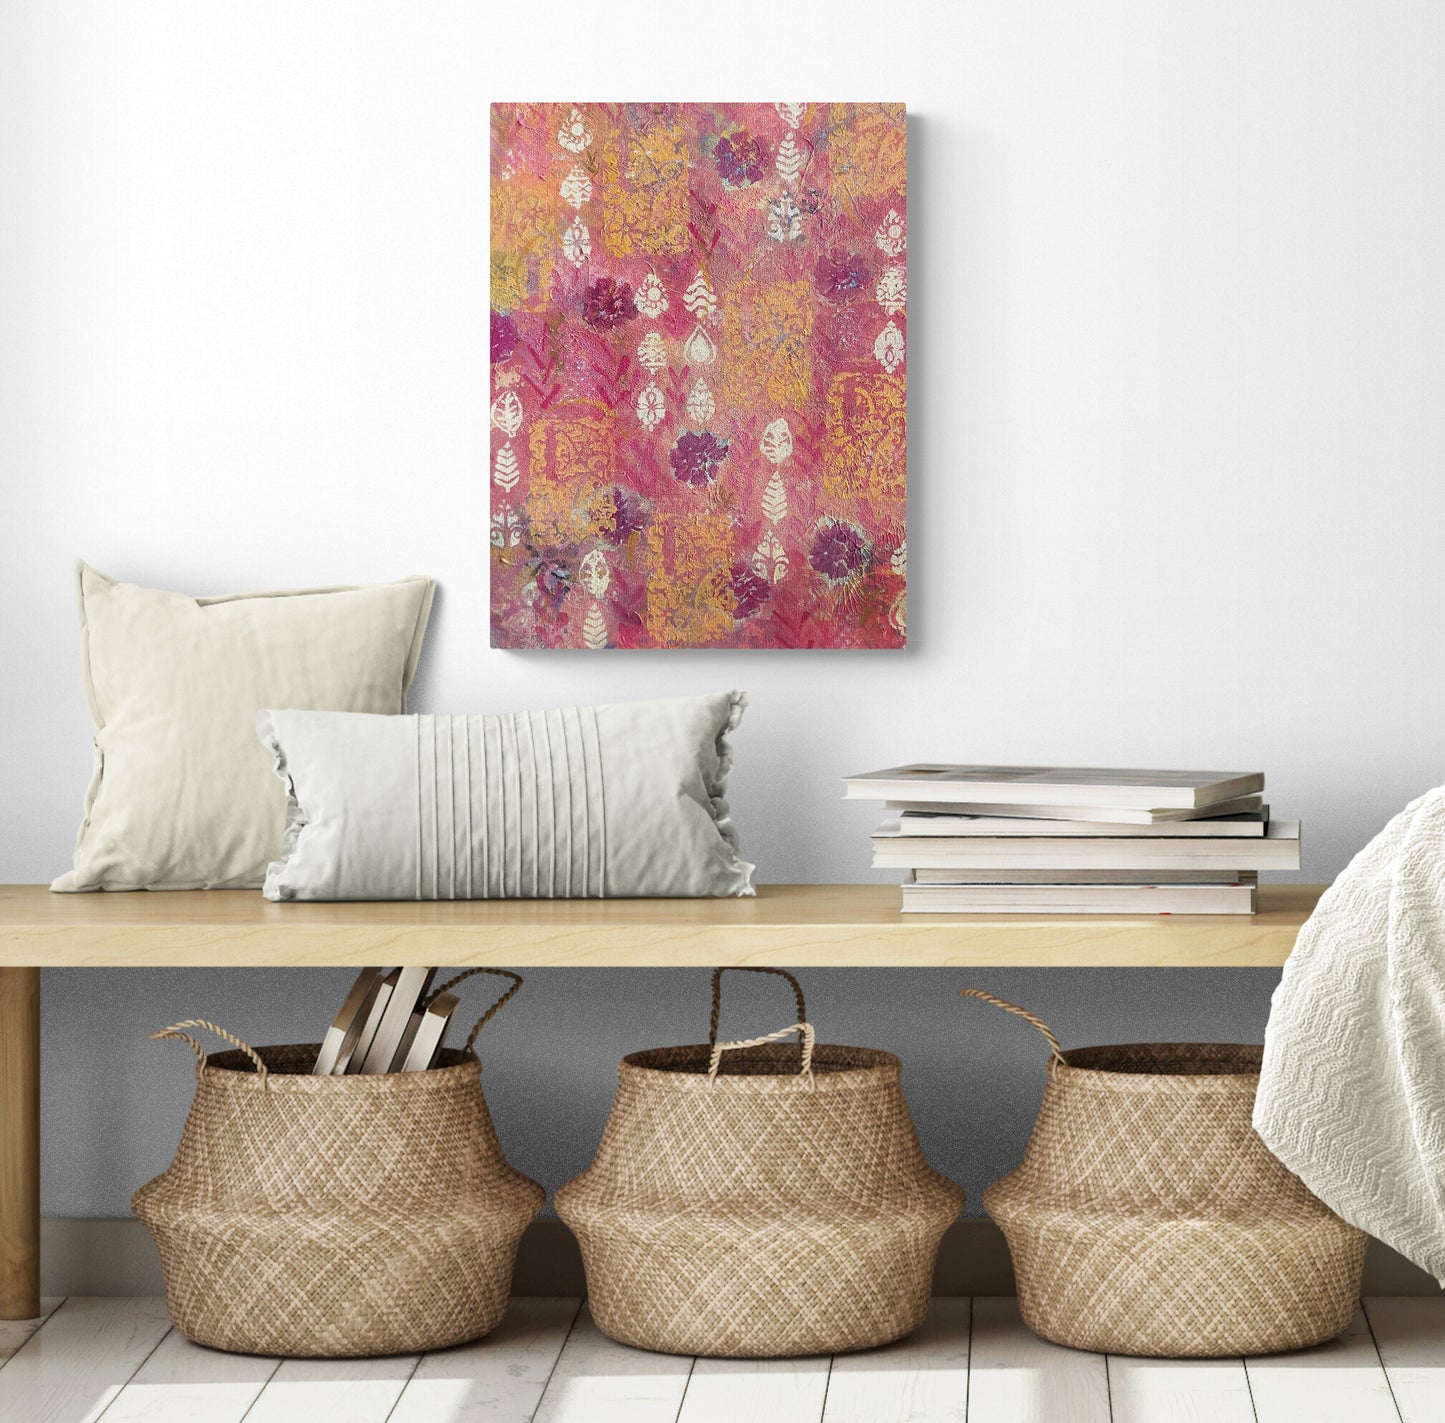 Abstract acrylic painting with red flowers orange and cream shapes in a room with a bench and baskets underneath